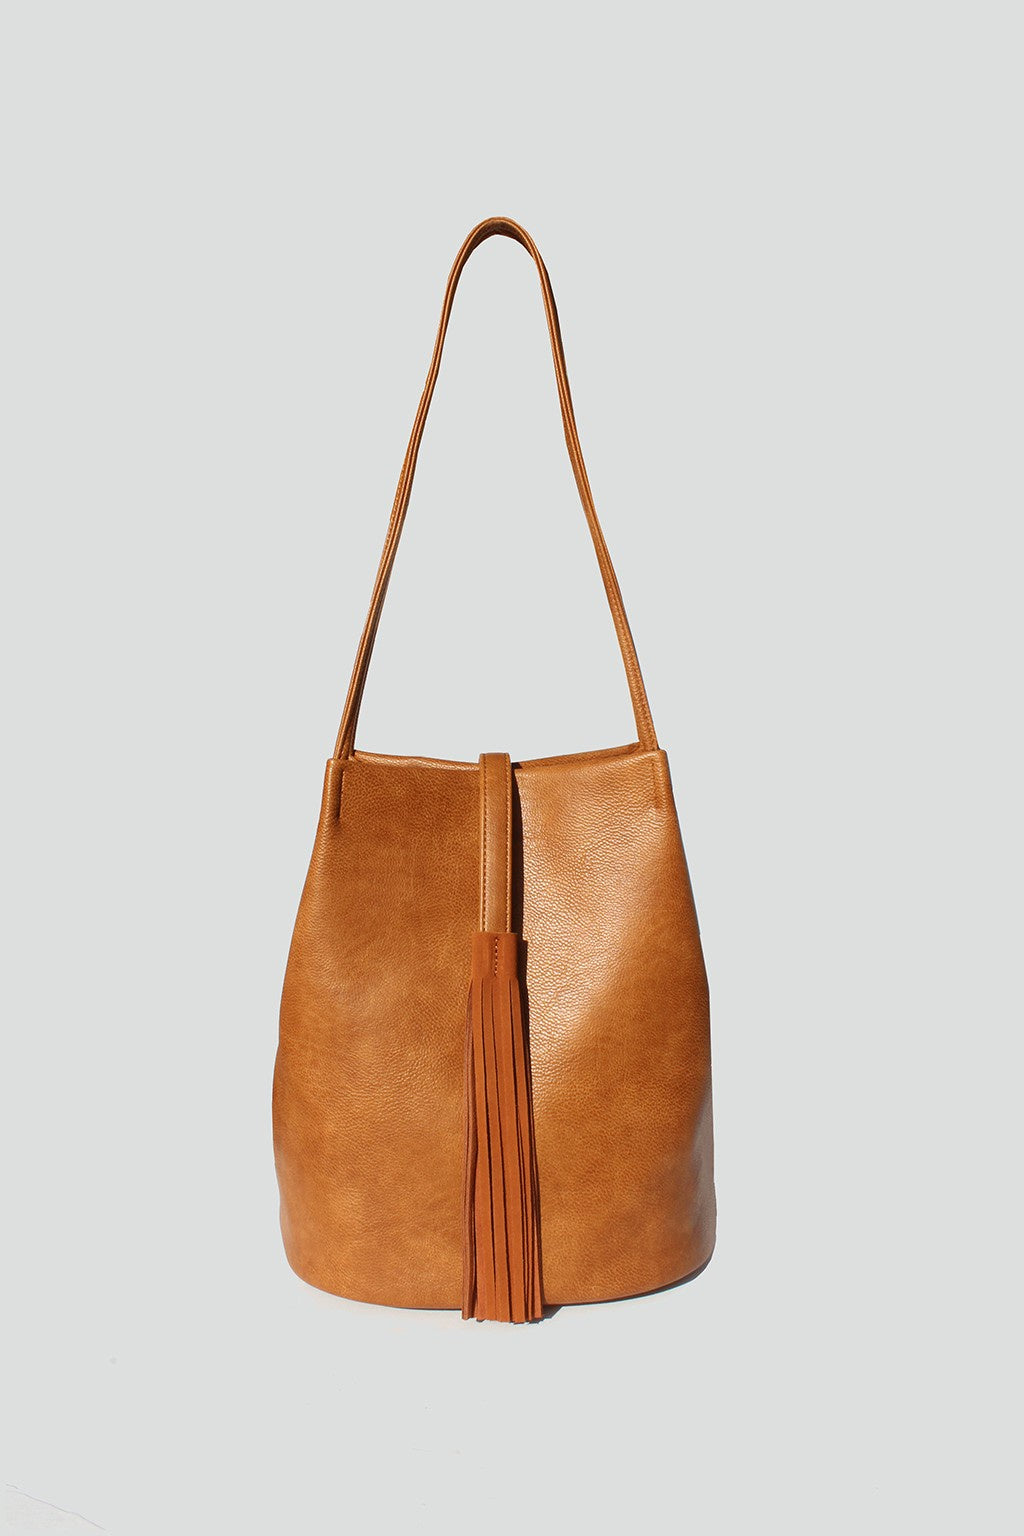 The Melody Tassel Tote Bag